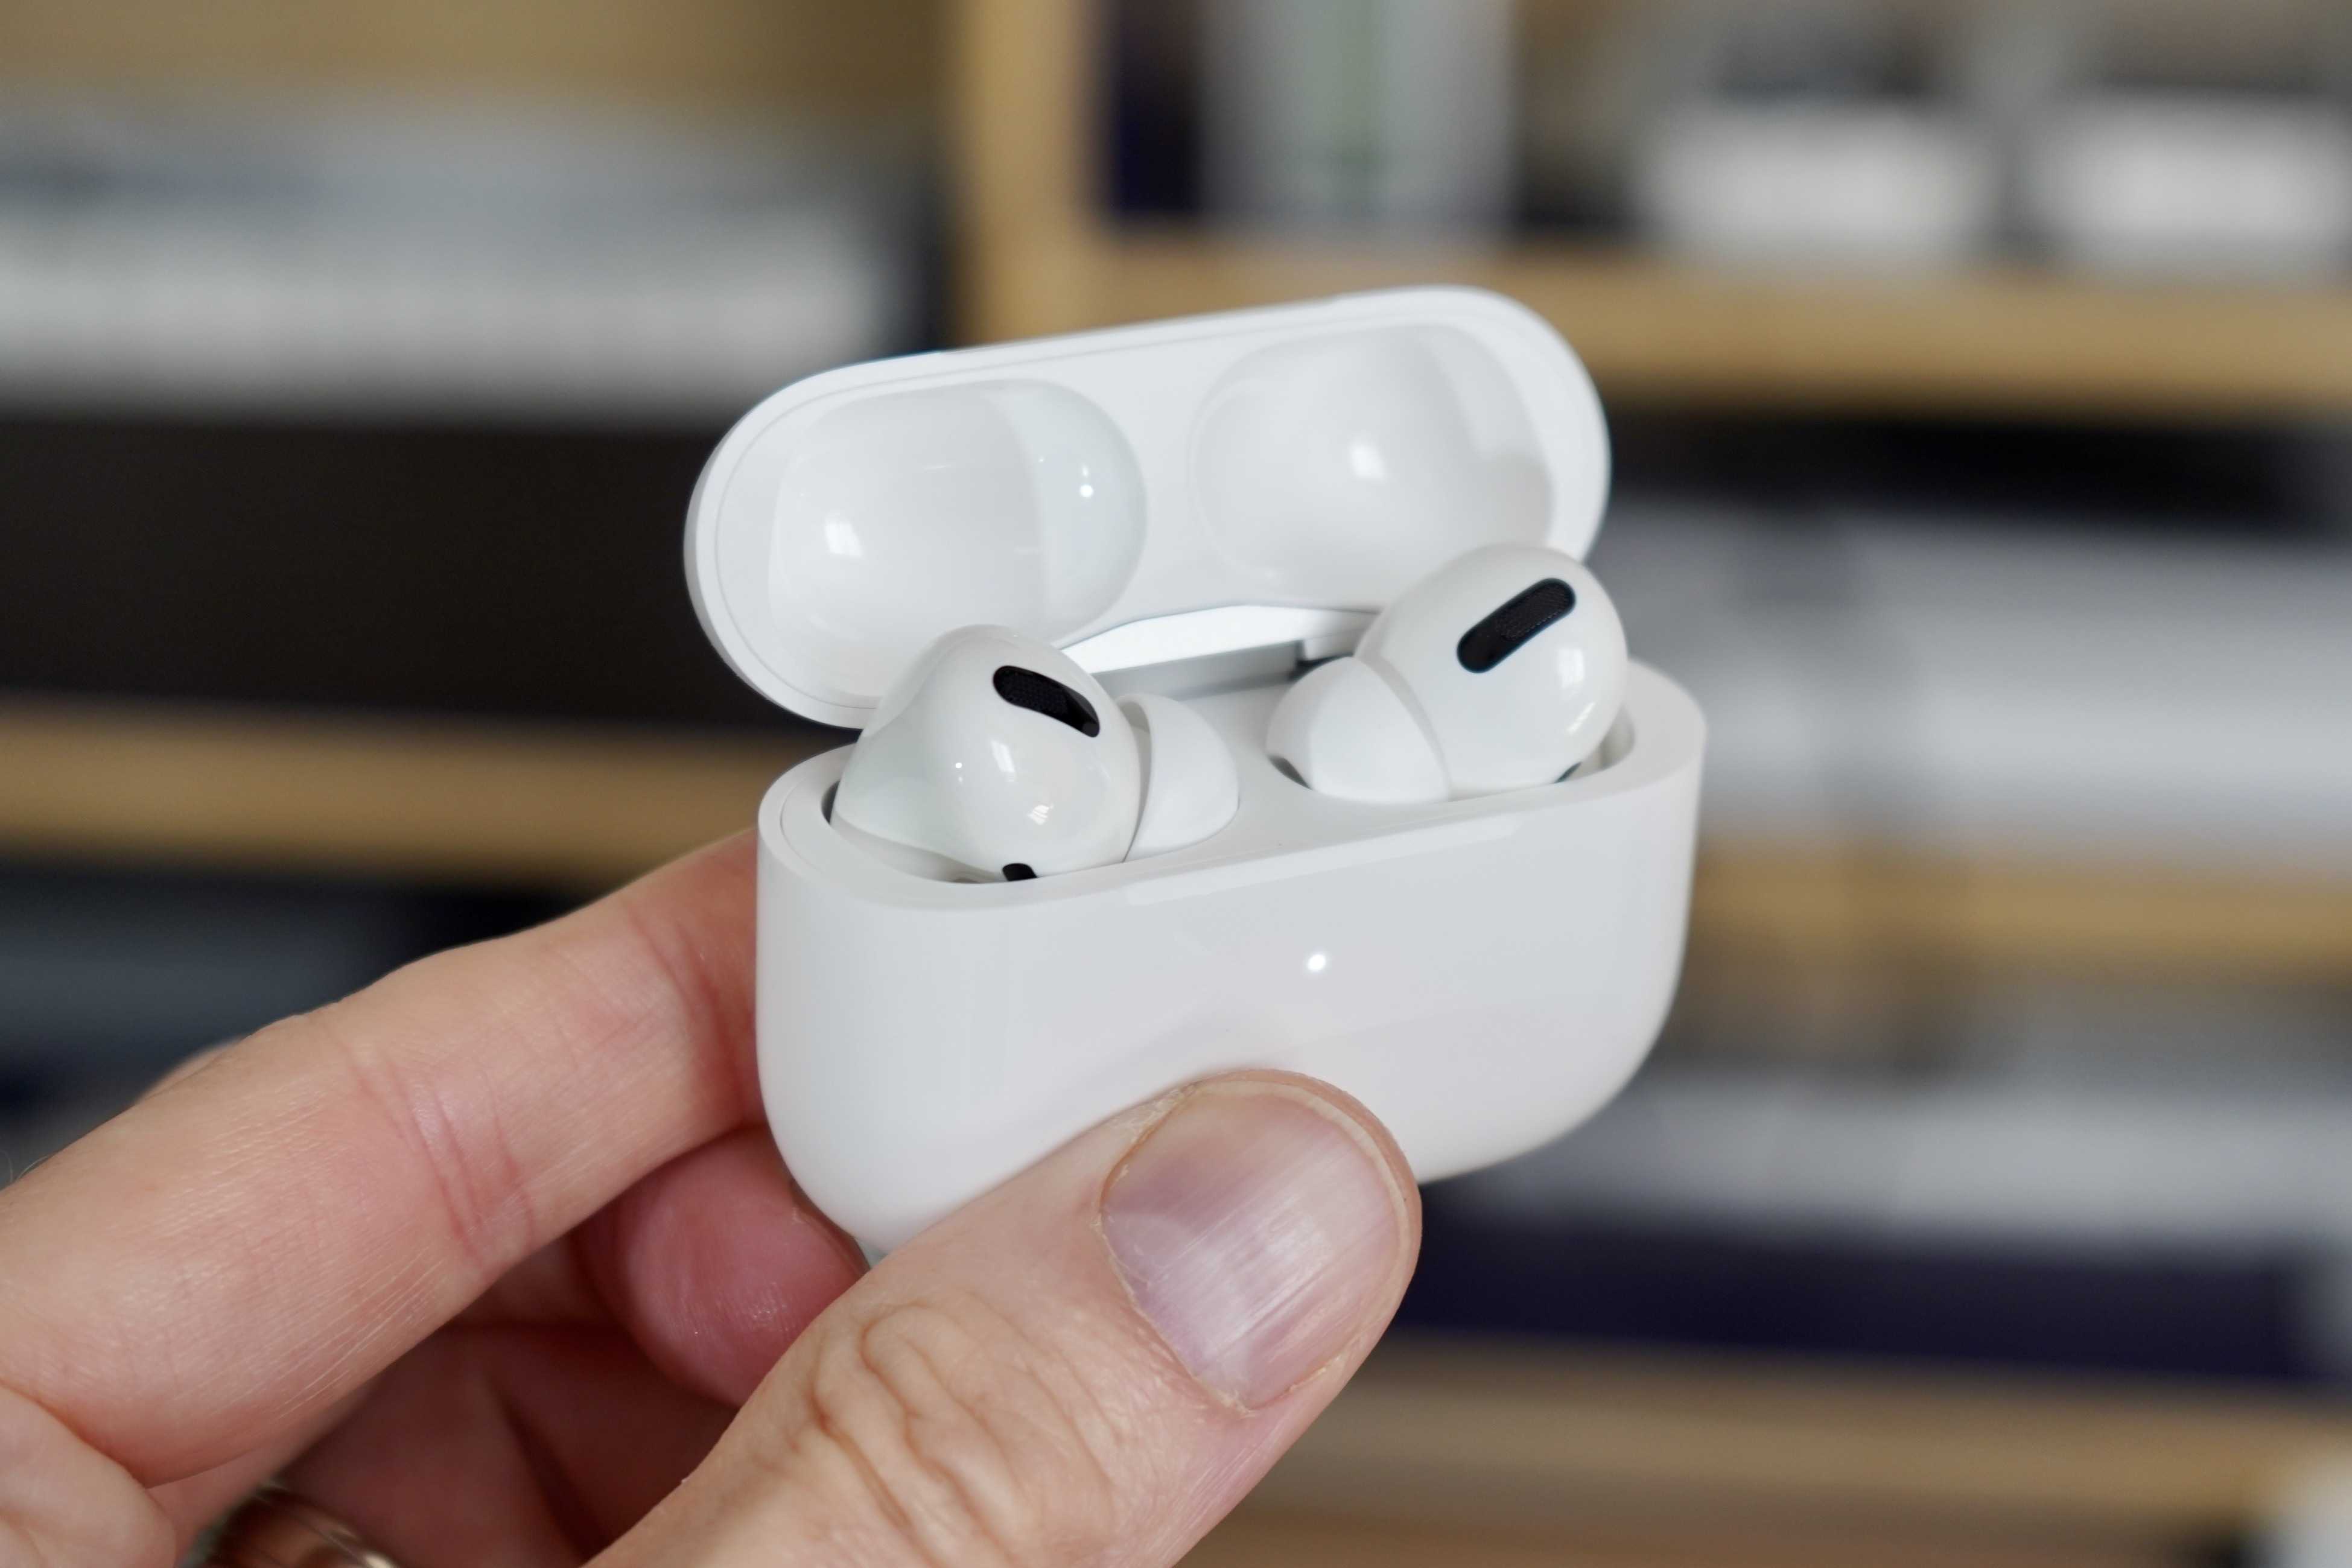 99 of people still don’t know the 10 hidden tips of AirPods! RedTom